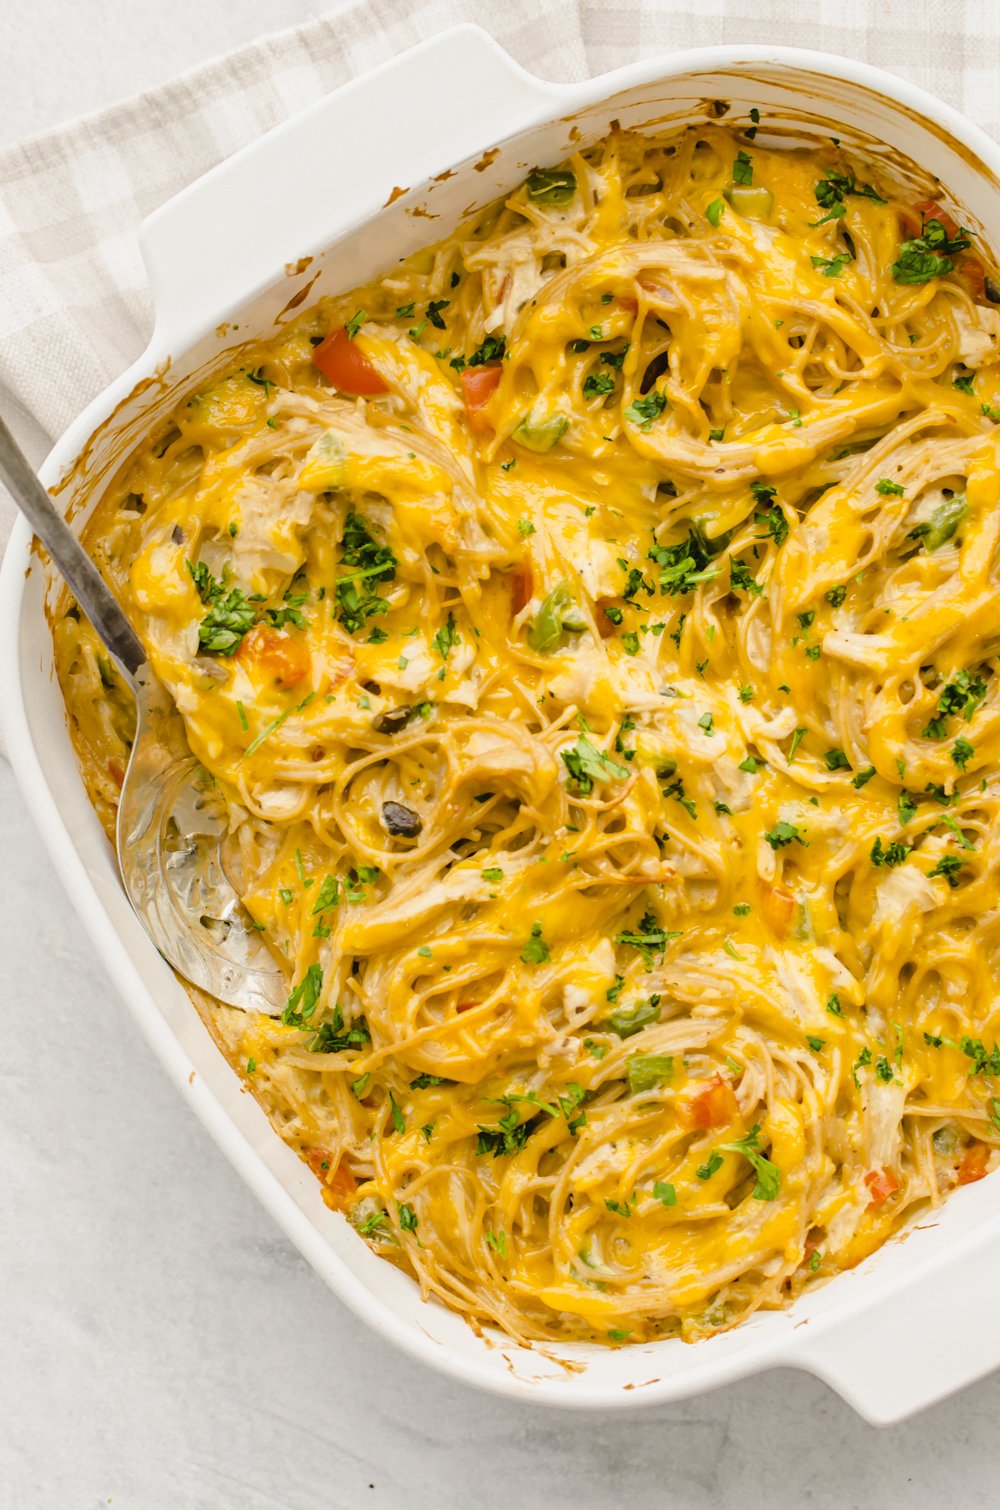 Freezer-friendly chicken spaghetti in a white baking dish ready to be served.